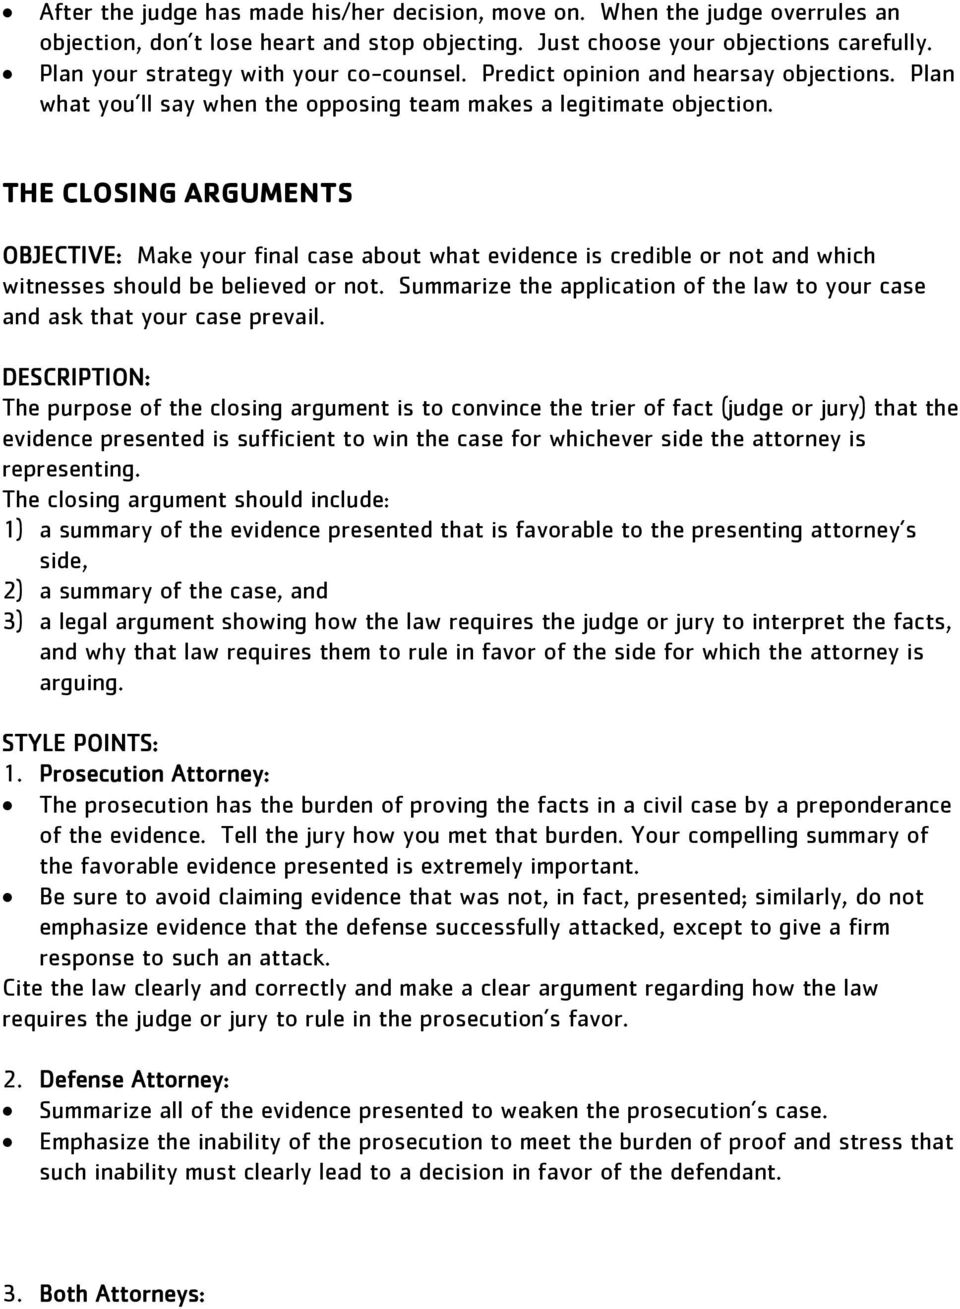 THE CLOSING ARGUMENTS OBJECTIVE: Make your final case about what evidence is credible or not and which witnesses should be believed or not.